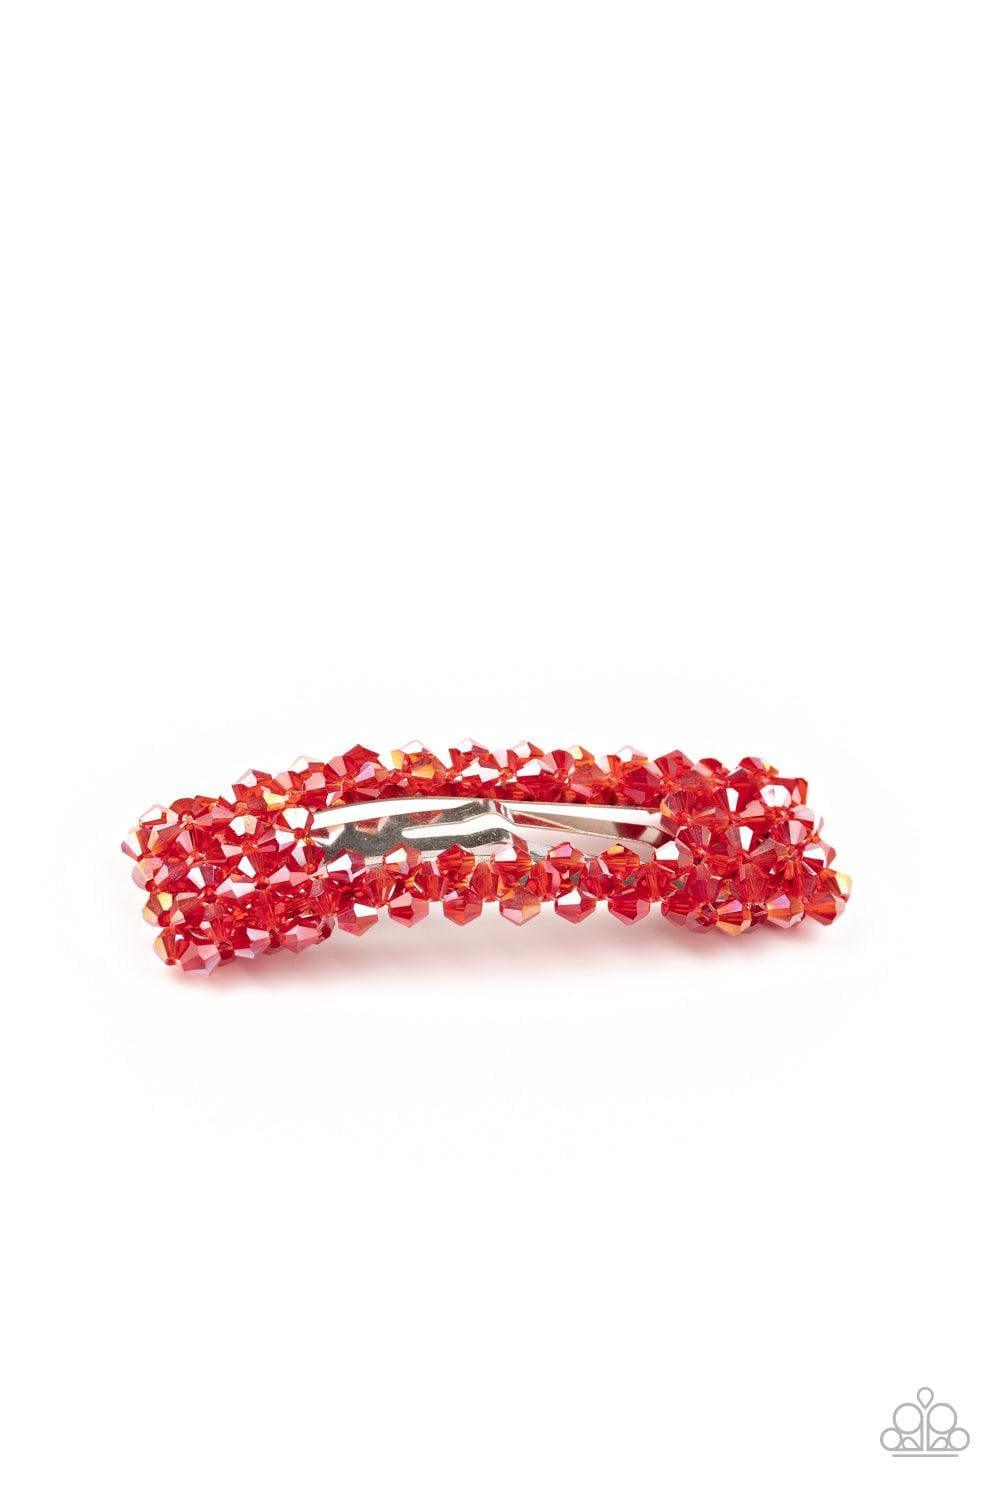 Paparazzi Accessories - No Filter - Red Hair Clip - Bling by JessieK